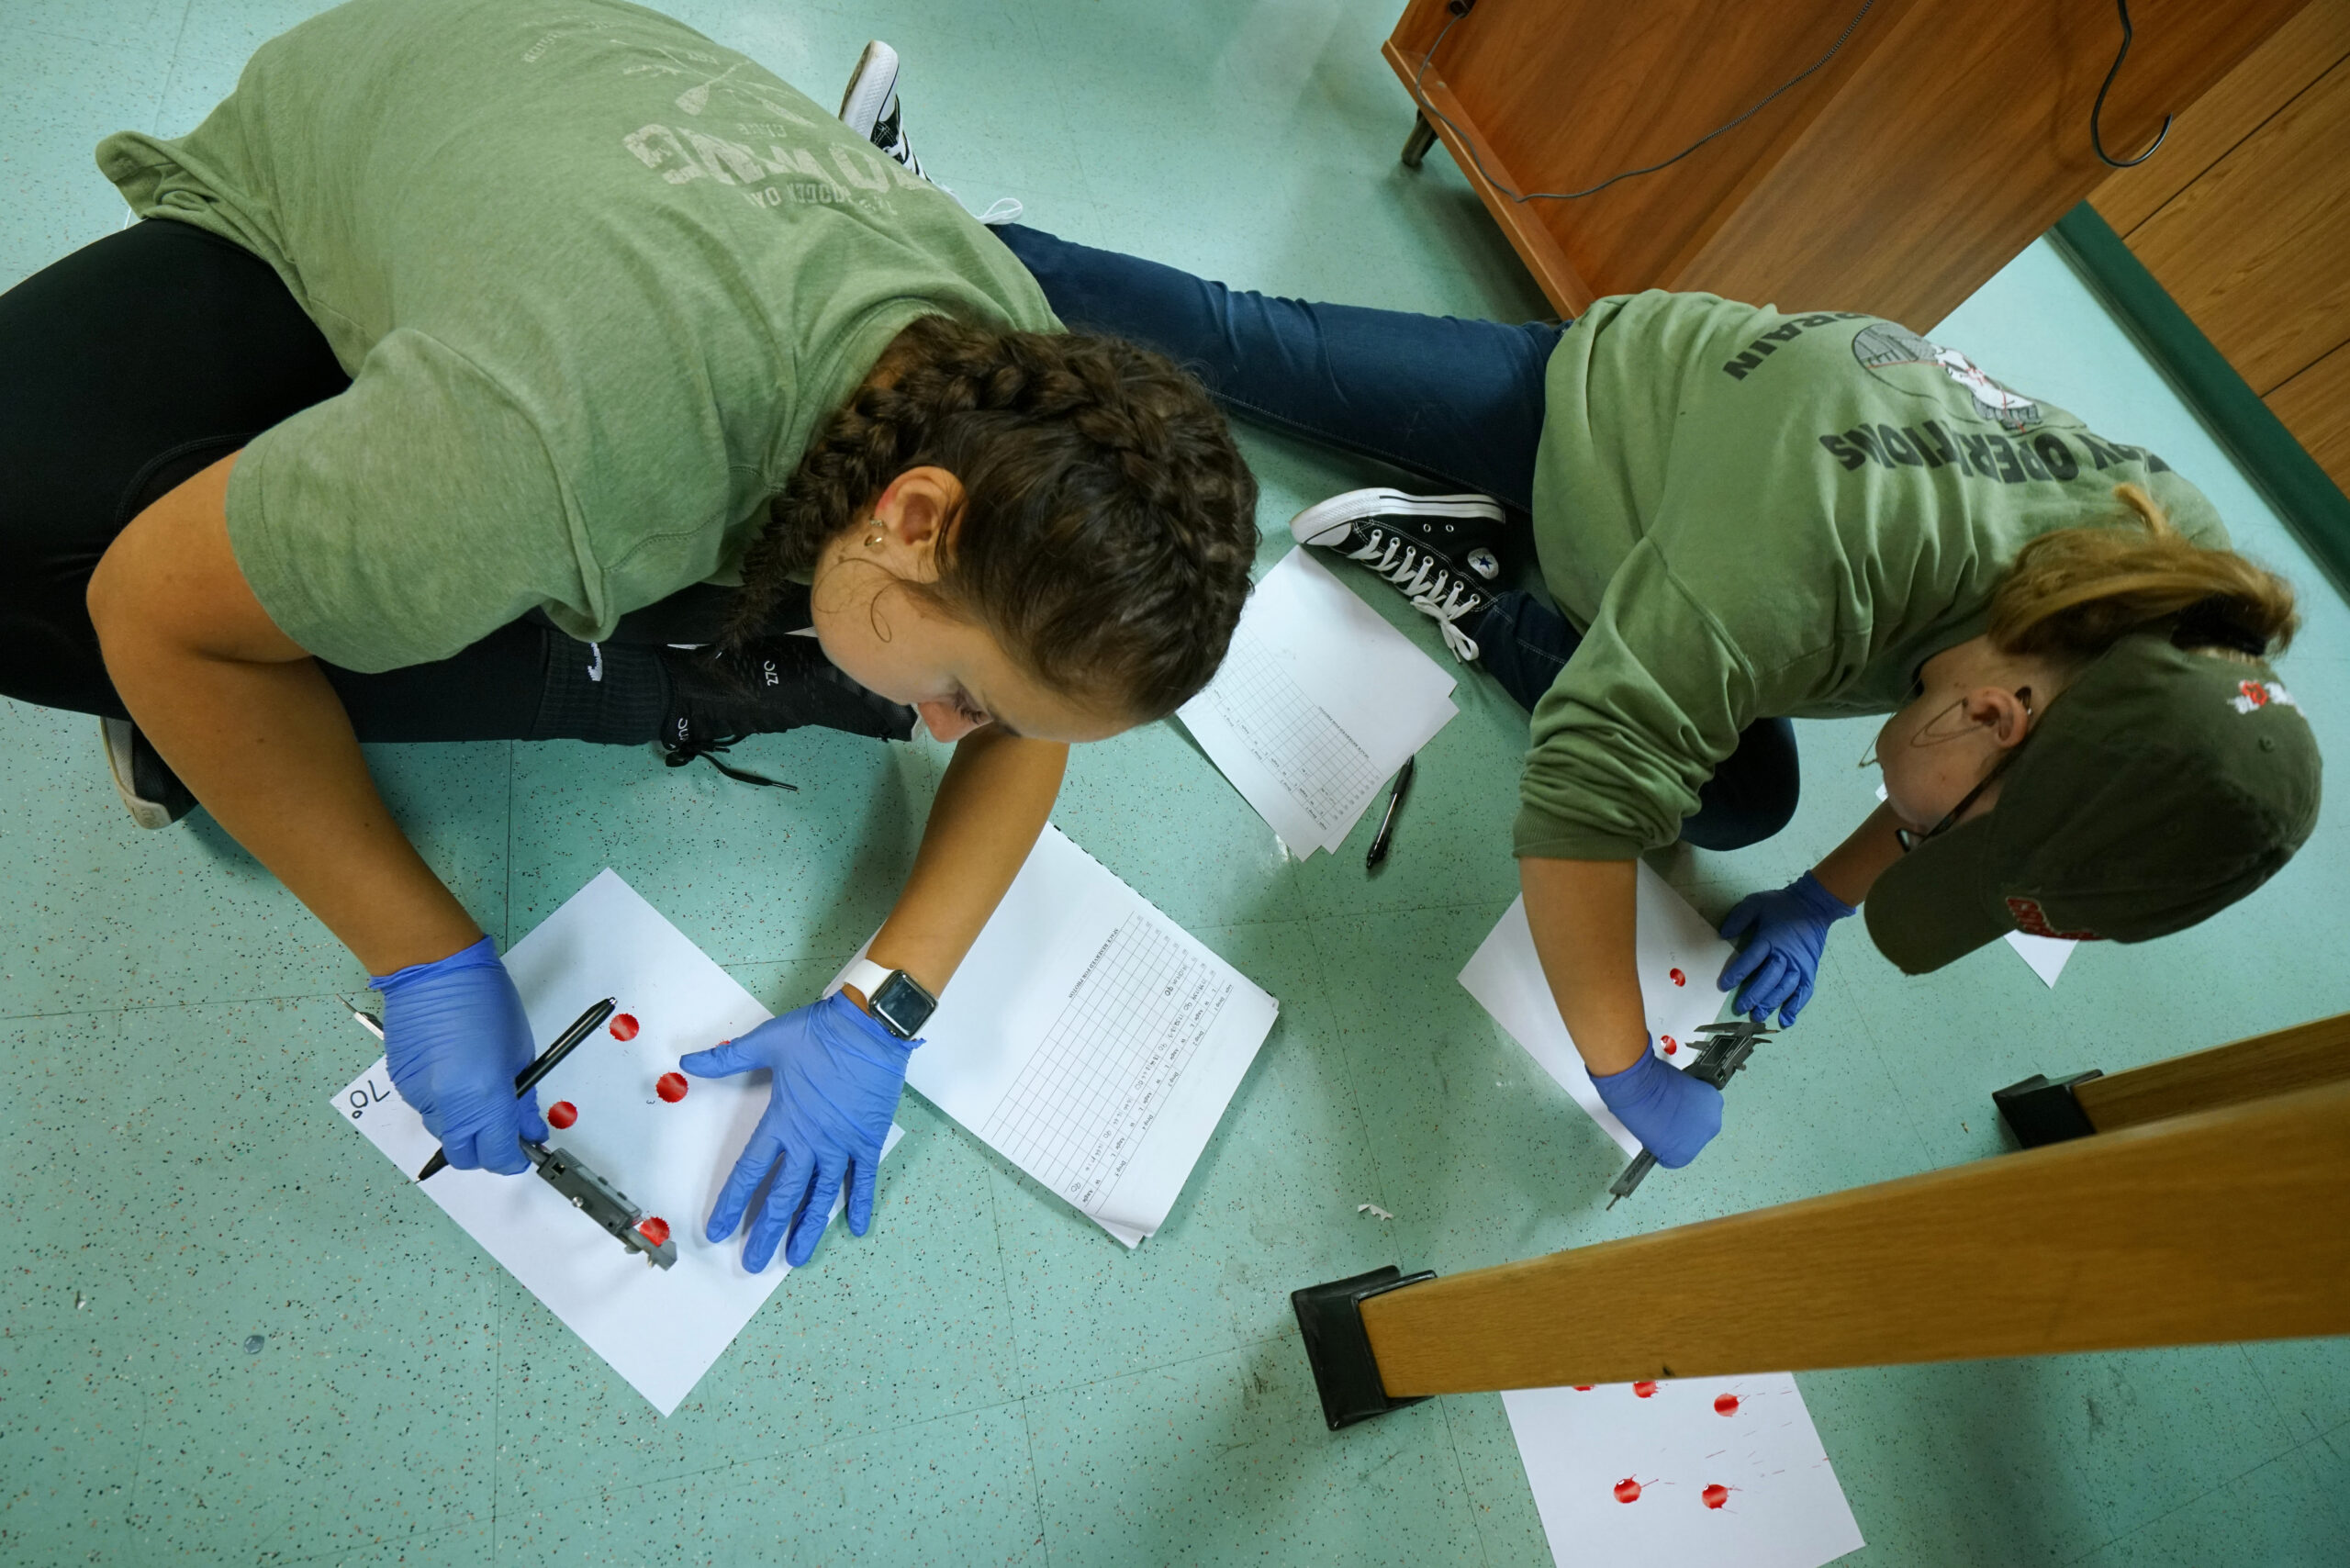 Two girls in green shirts measuring blood splatters on some sheets of paper